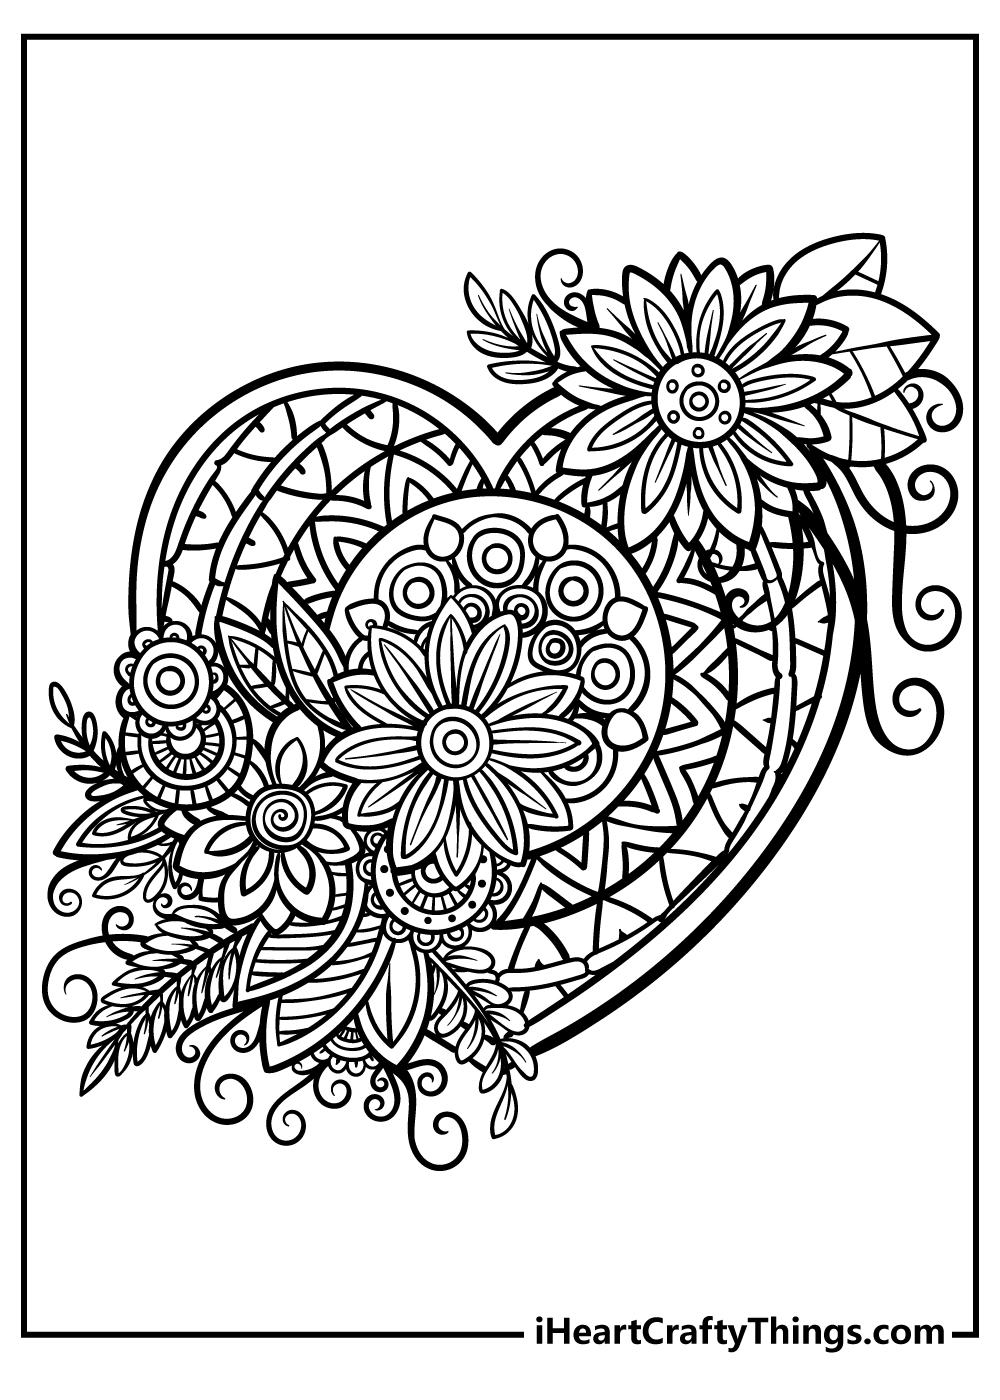 Free Coloring Pages Adult